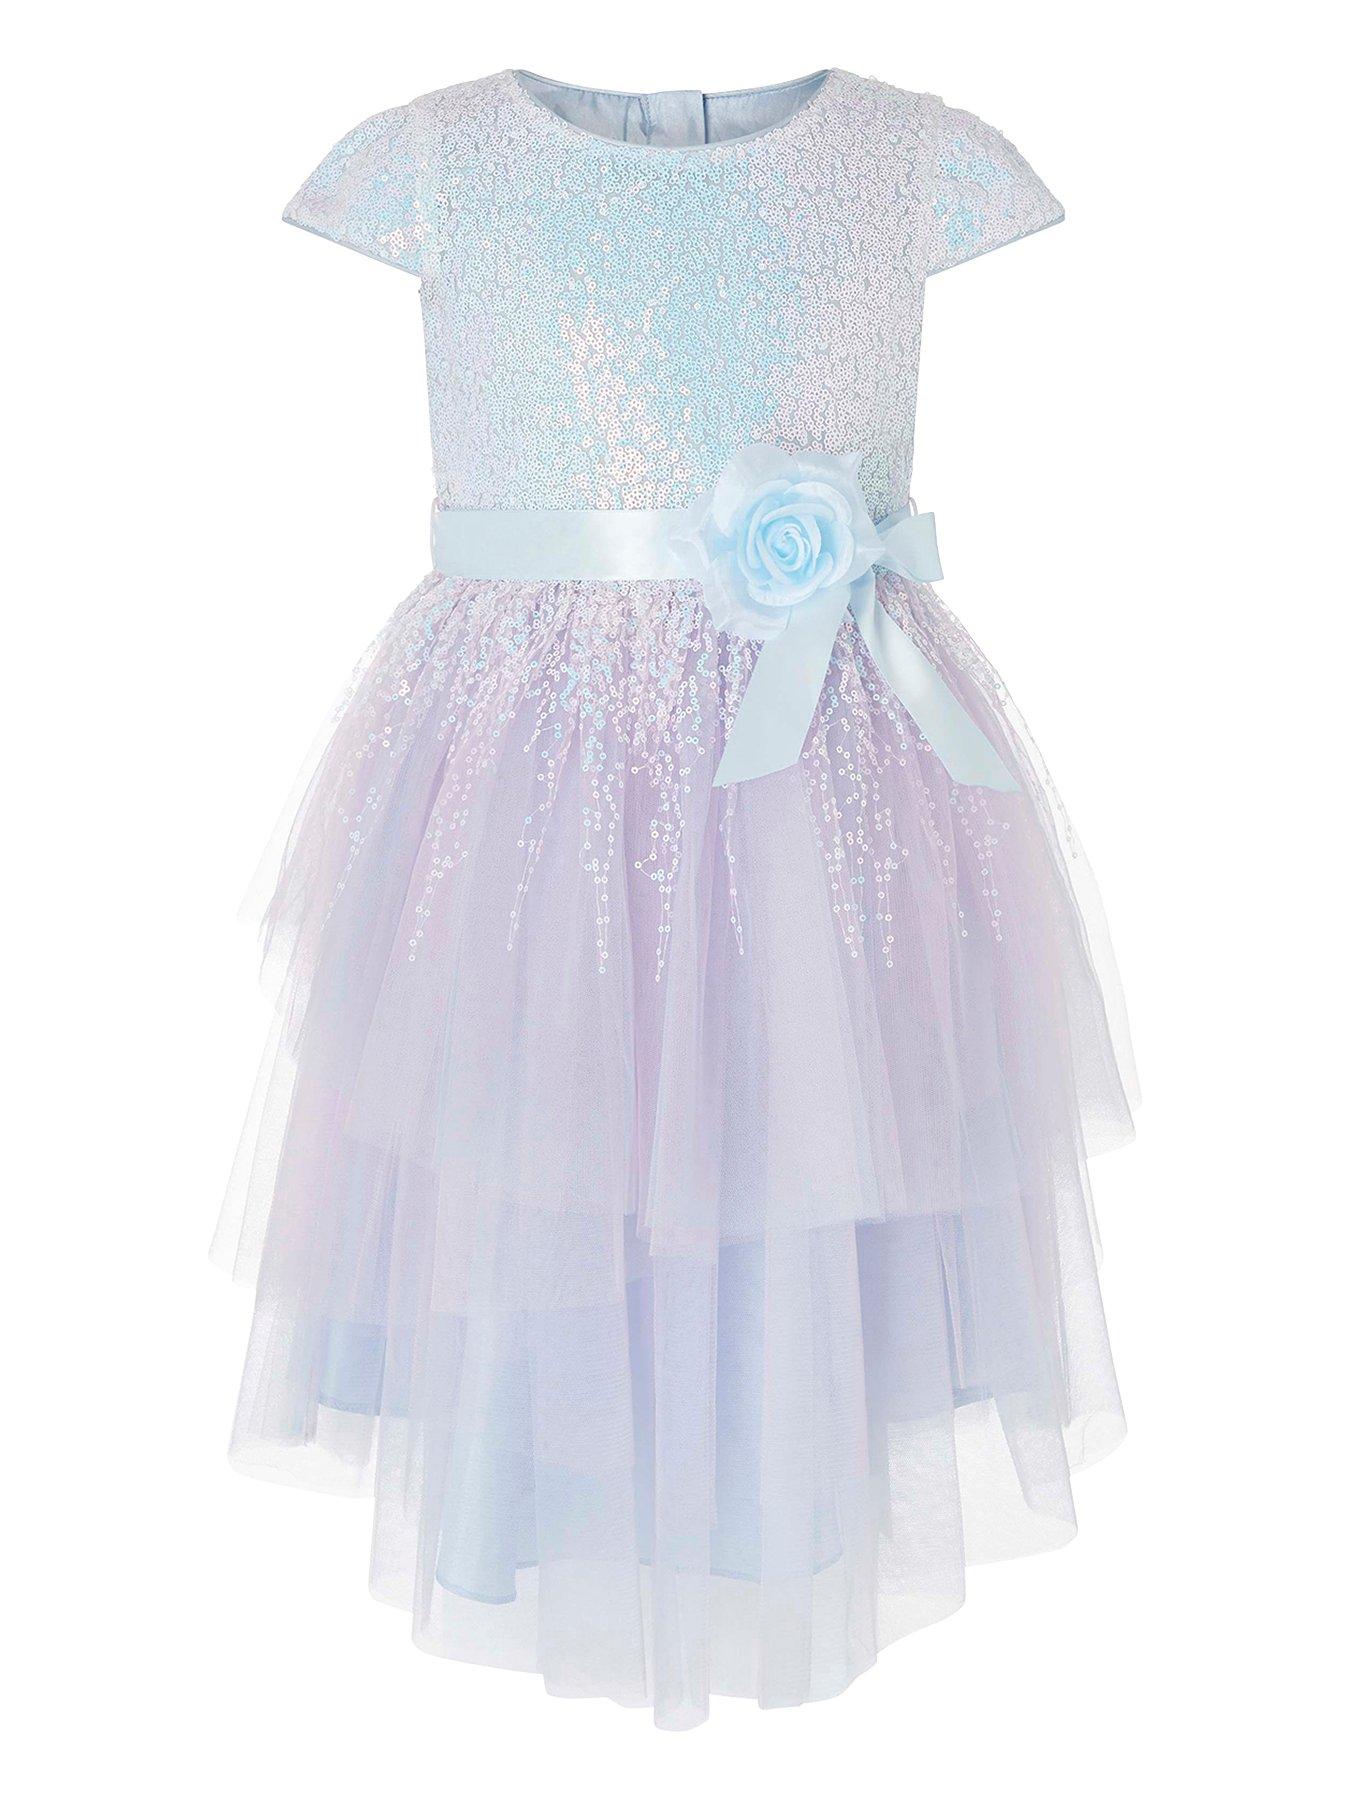 monsoon party dresses baby girl